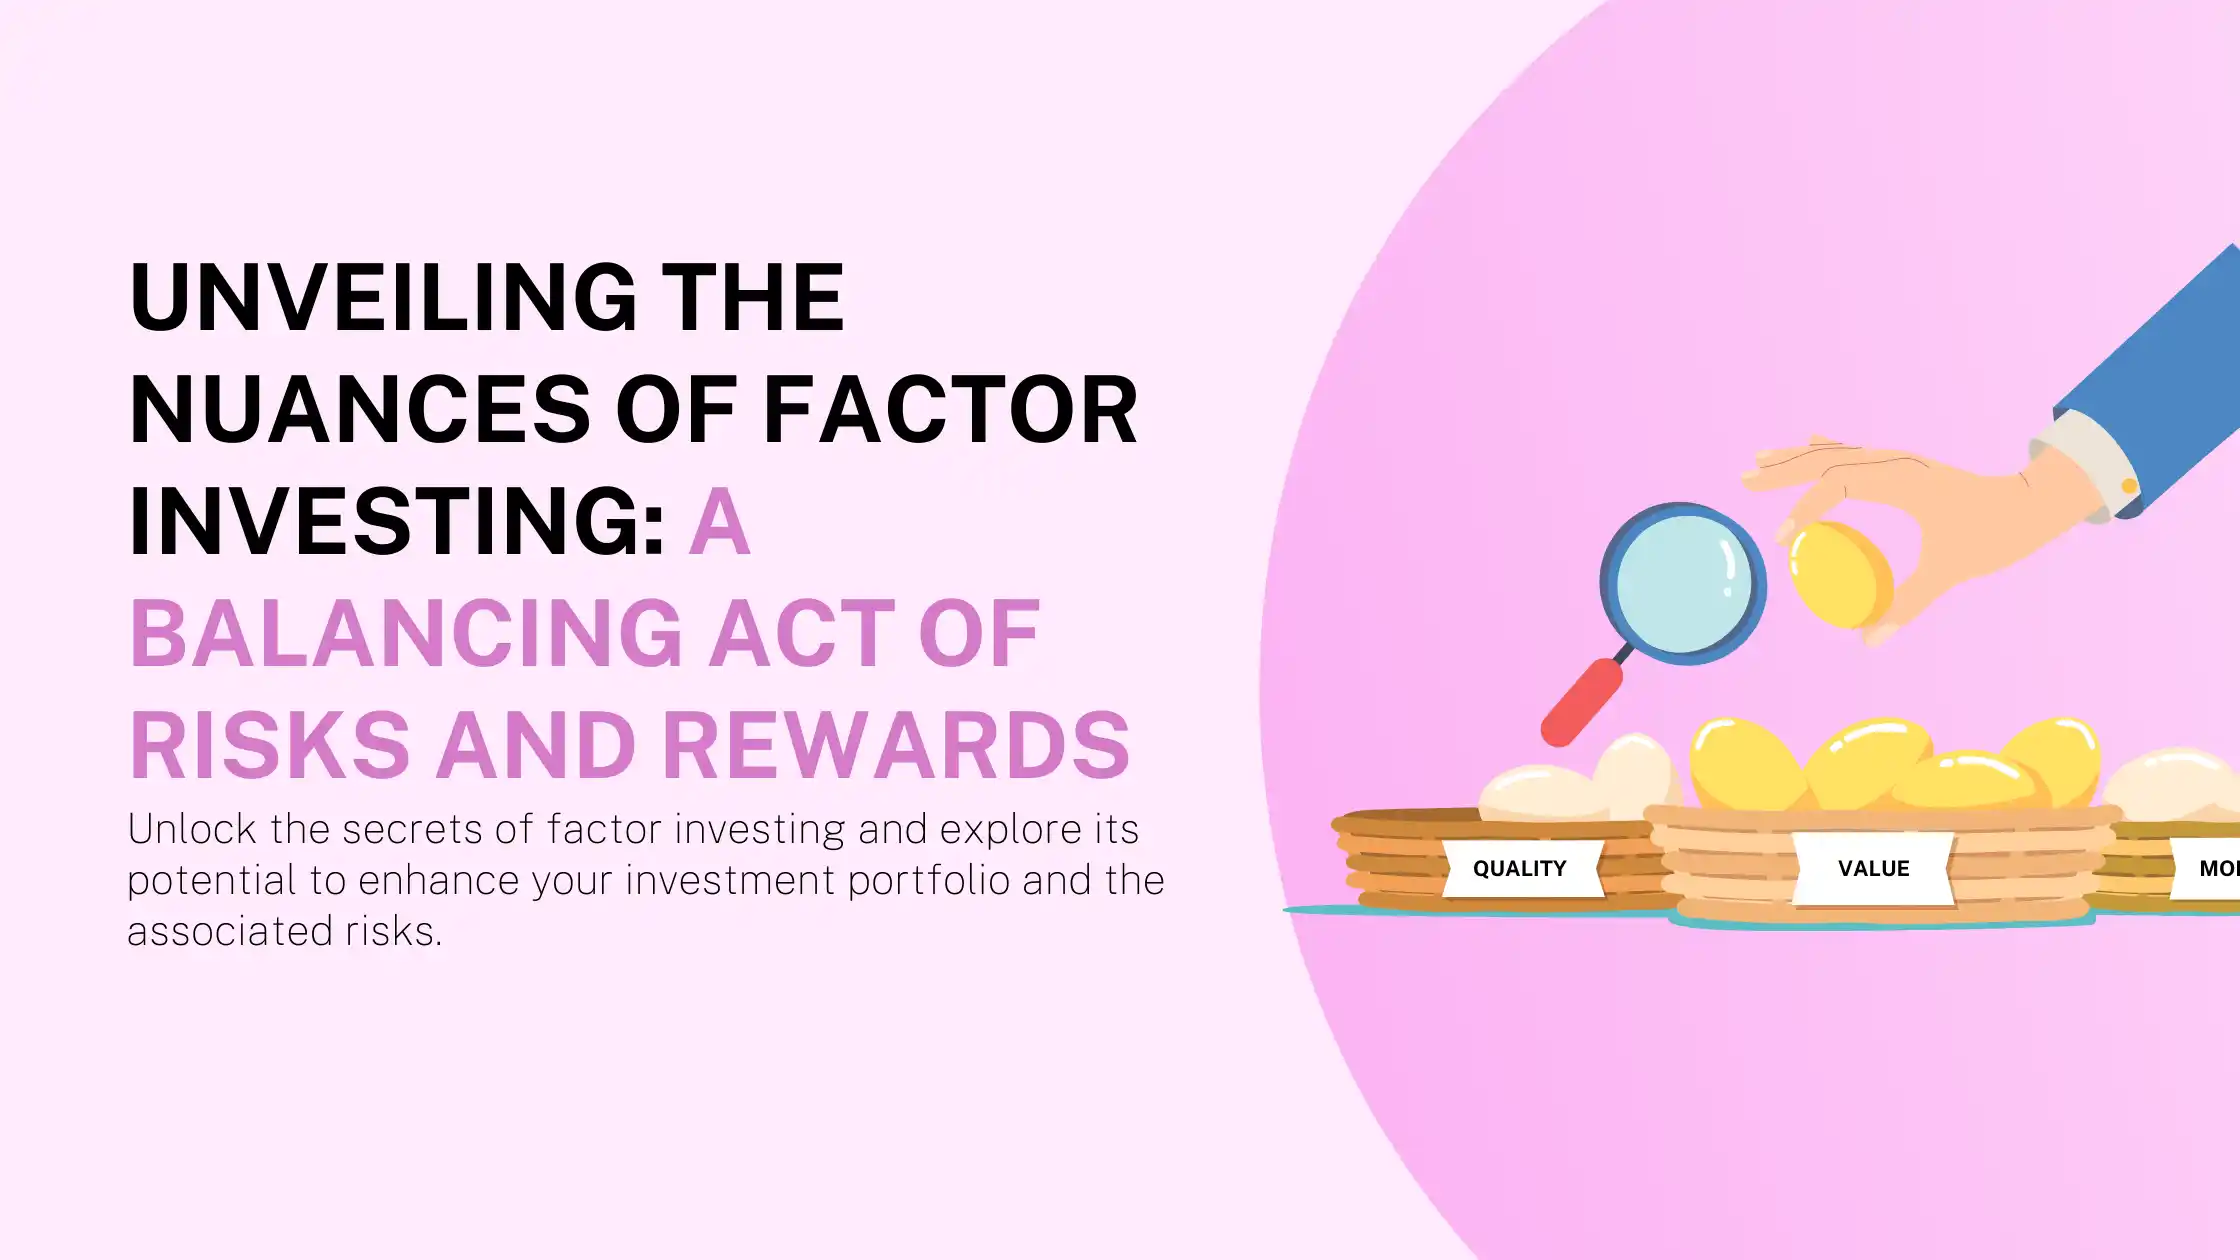 Unveiling the Nuances of Factor Investing: A Balancing Act of Risks and Rewards